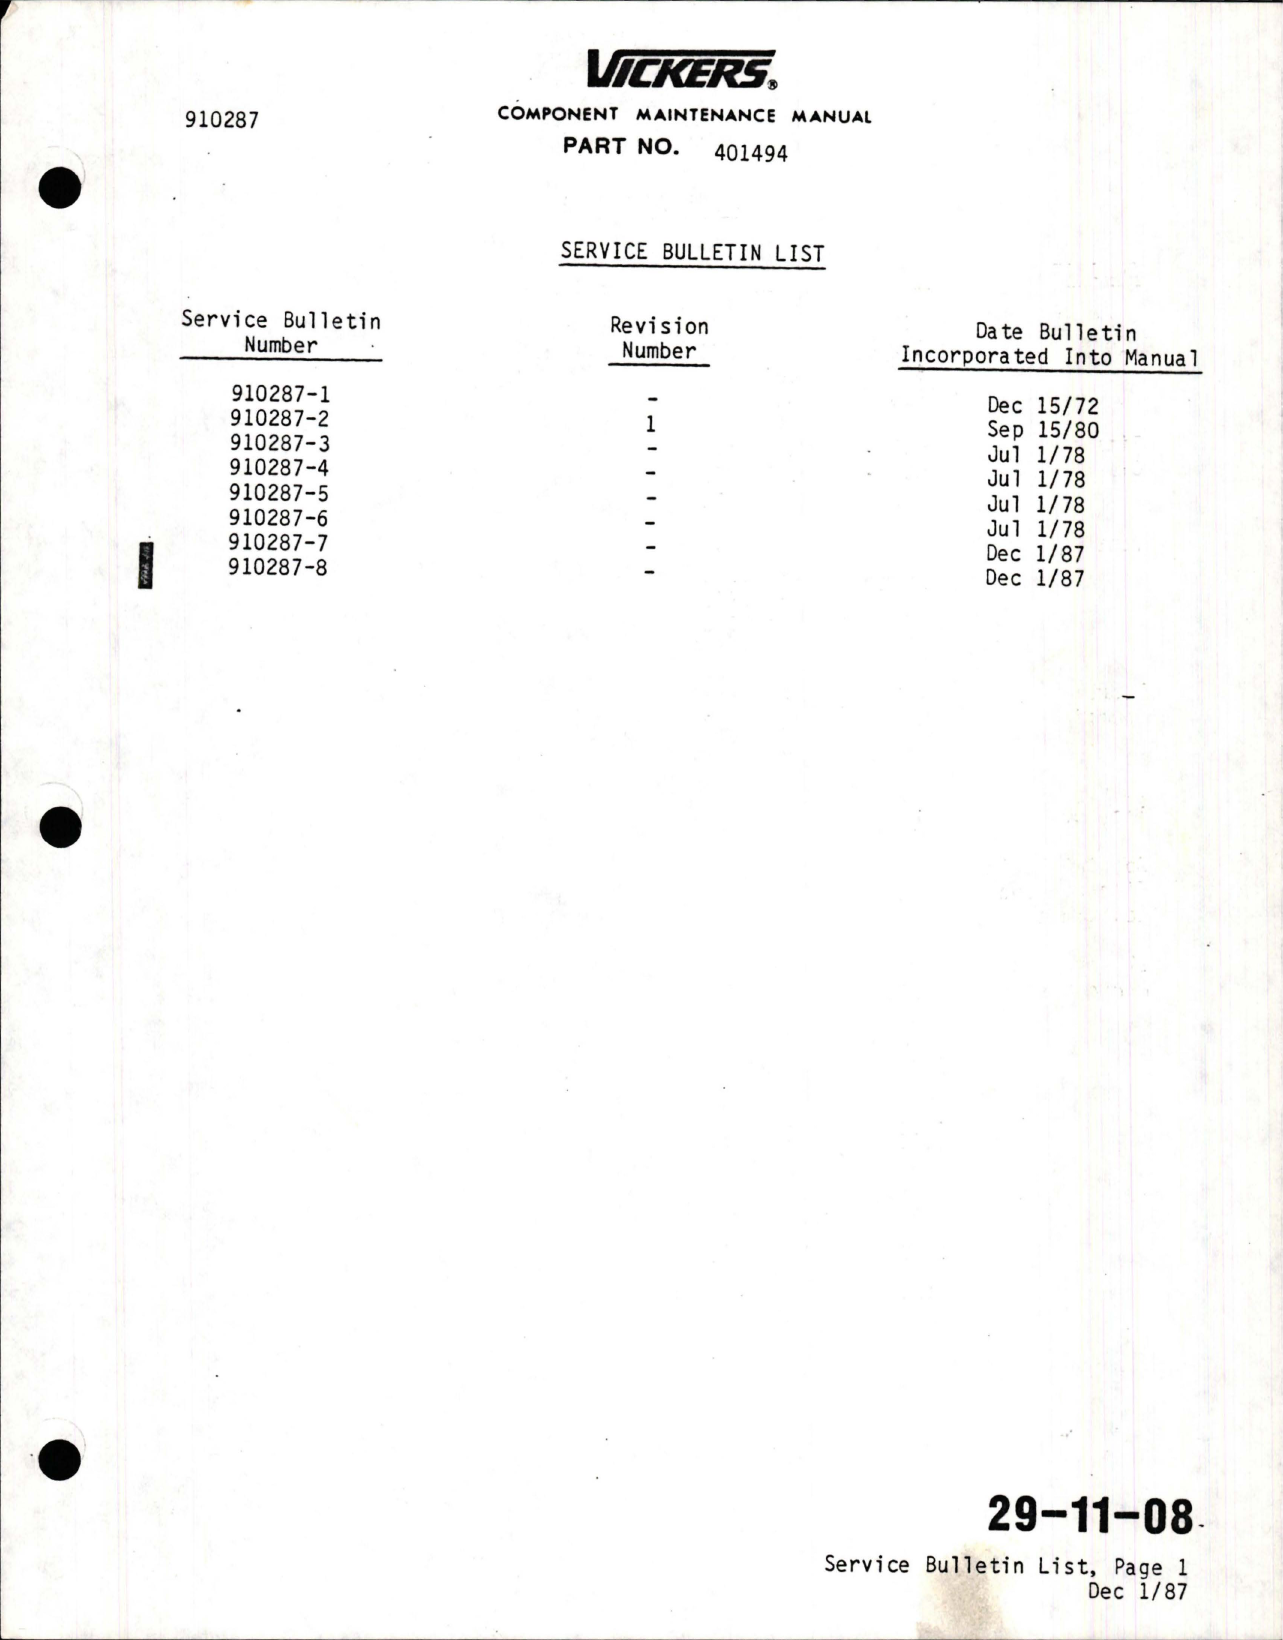 Sample page 9 from AirCorps Library document: Maintenance Manual with Illustrated Parts List for Variable Displacement Hydraulic Motorpump Assembly - Model MPEV3-022-14C, MPEV3-022-14D, and MPEV3-022-14E